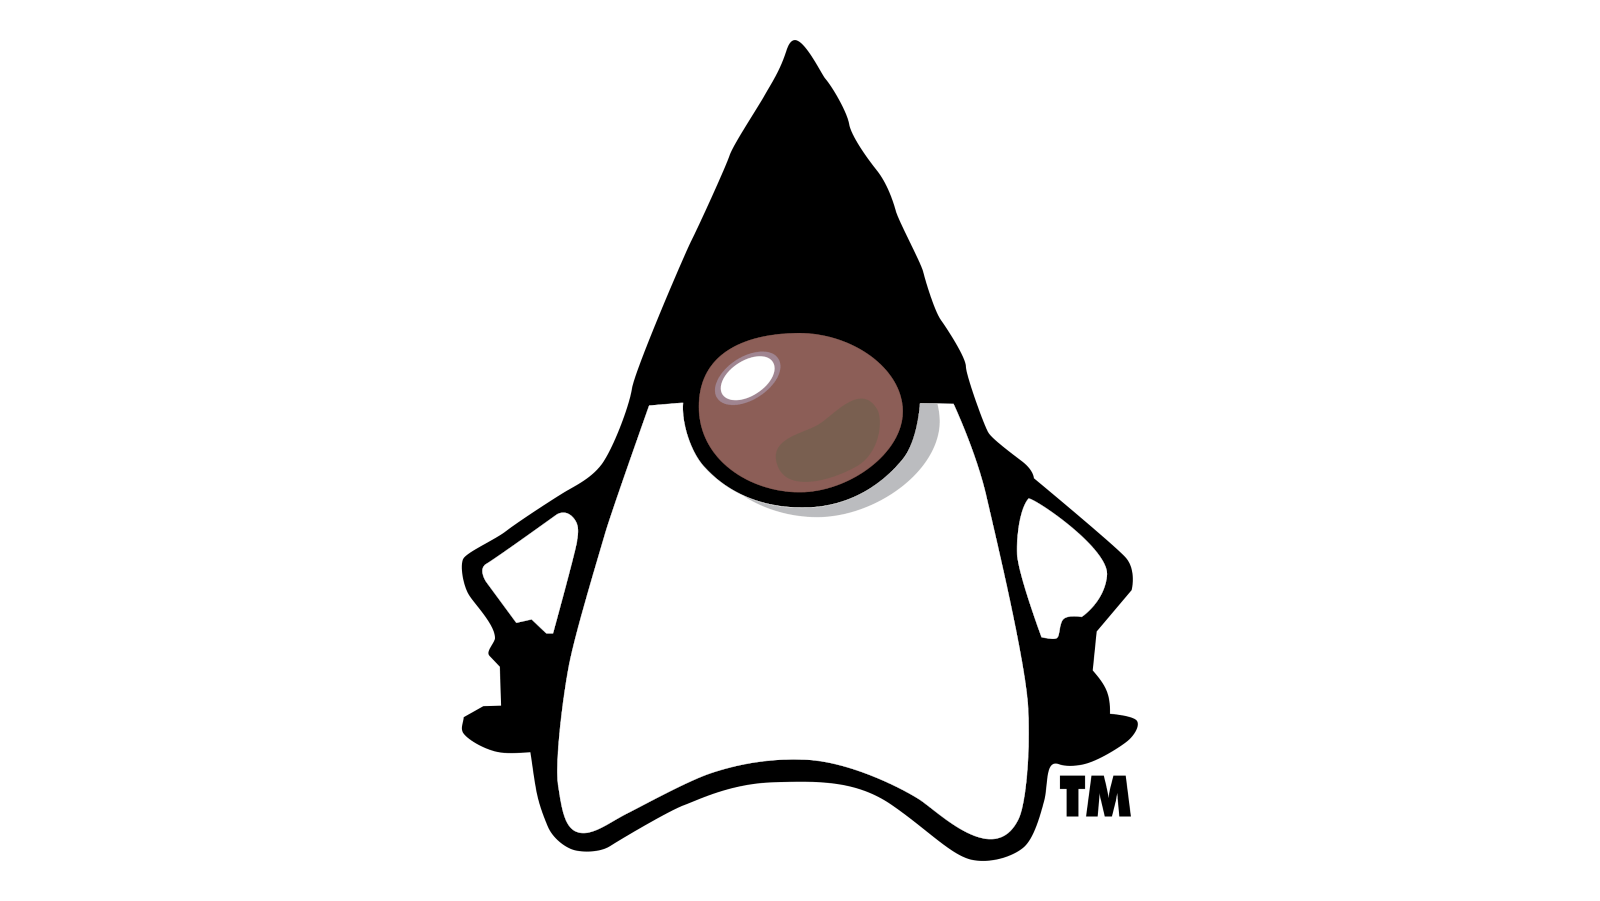 Honestly, Java's mascot is pretty cool, Scala needs a mascot too.